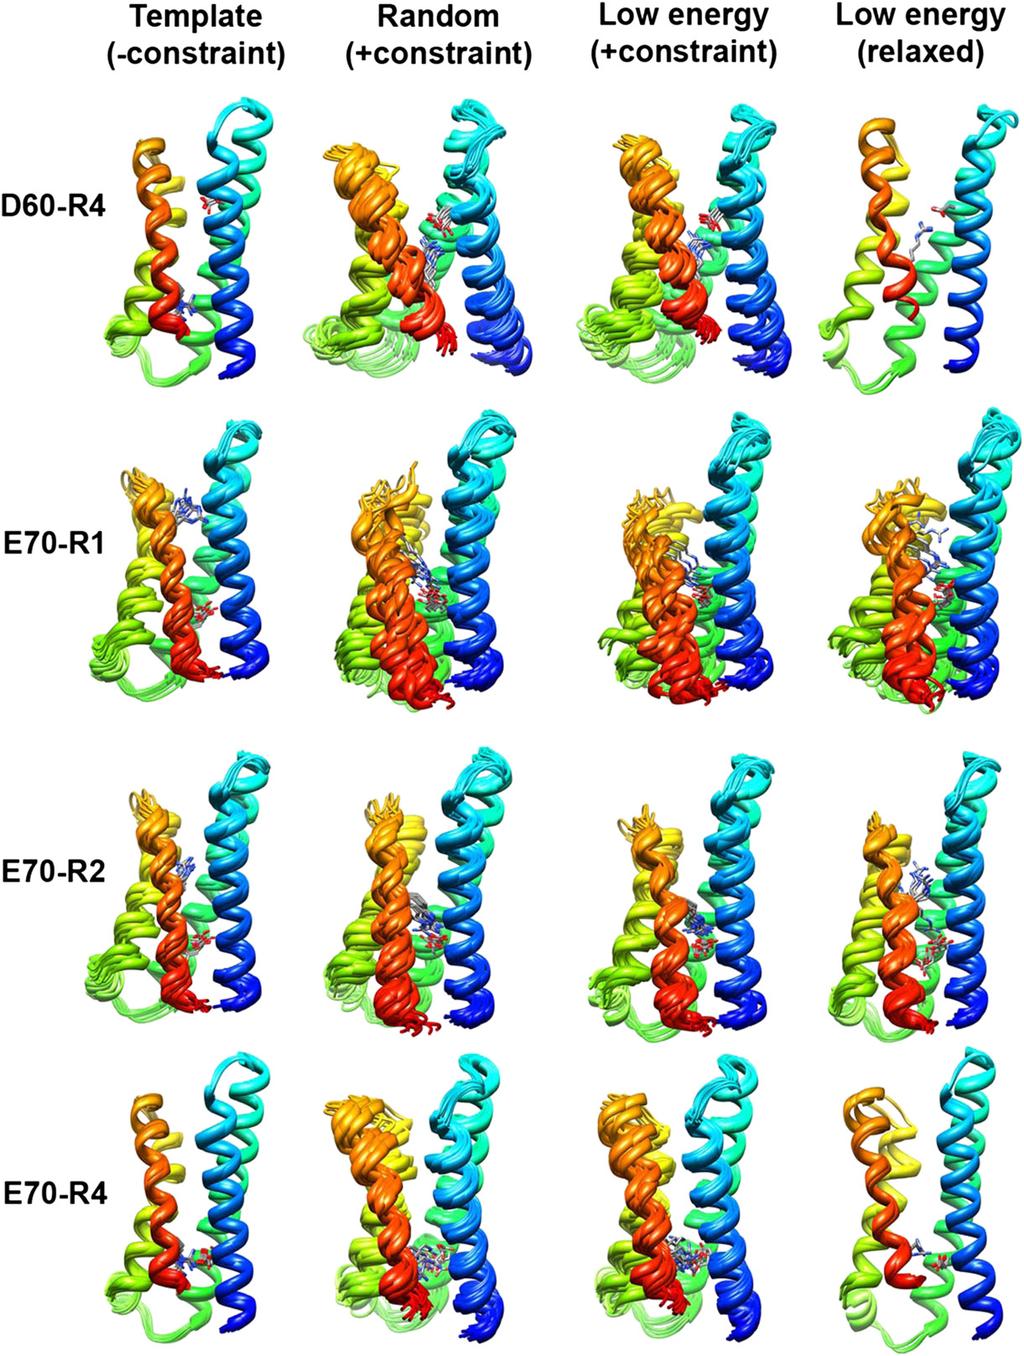 Fig. S9. Ensembles of NaChBac VSD models based on experimental constraints for D60-R4, E70-R1, E70-R2, and E70-R4 pairs.